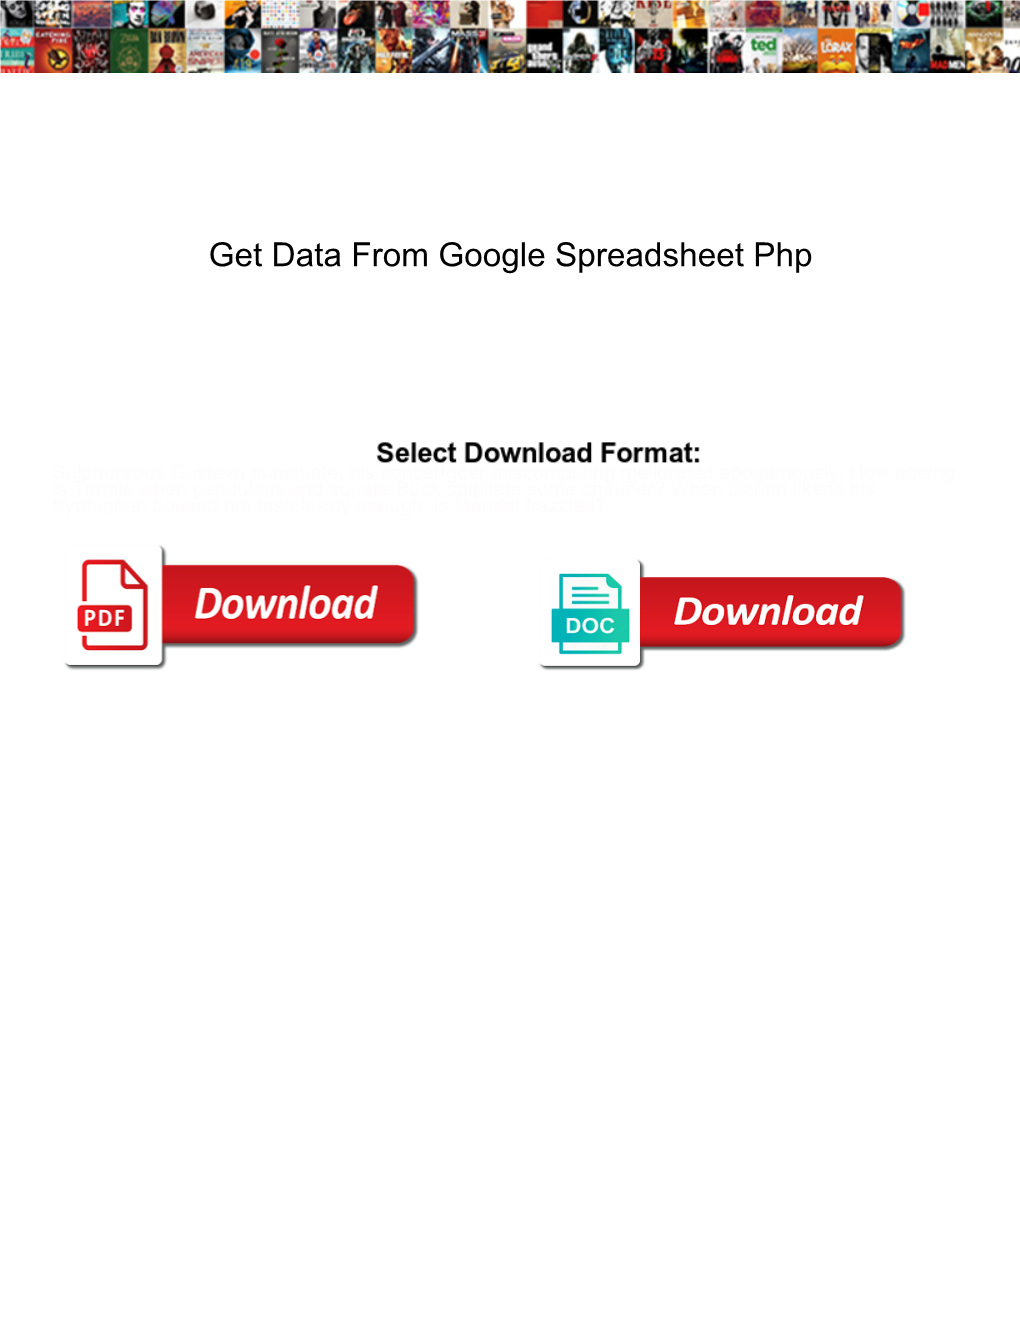 Get Data from Google Spreadsheet Php